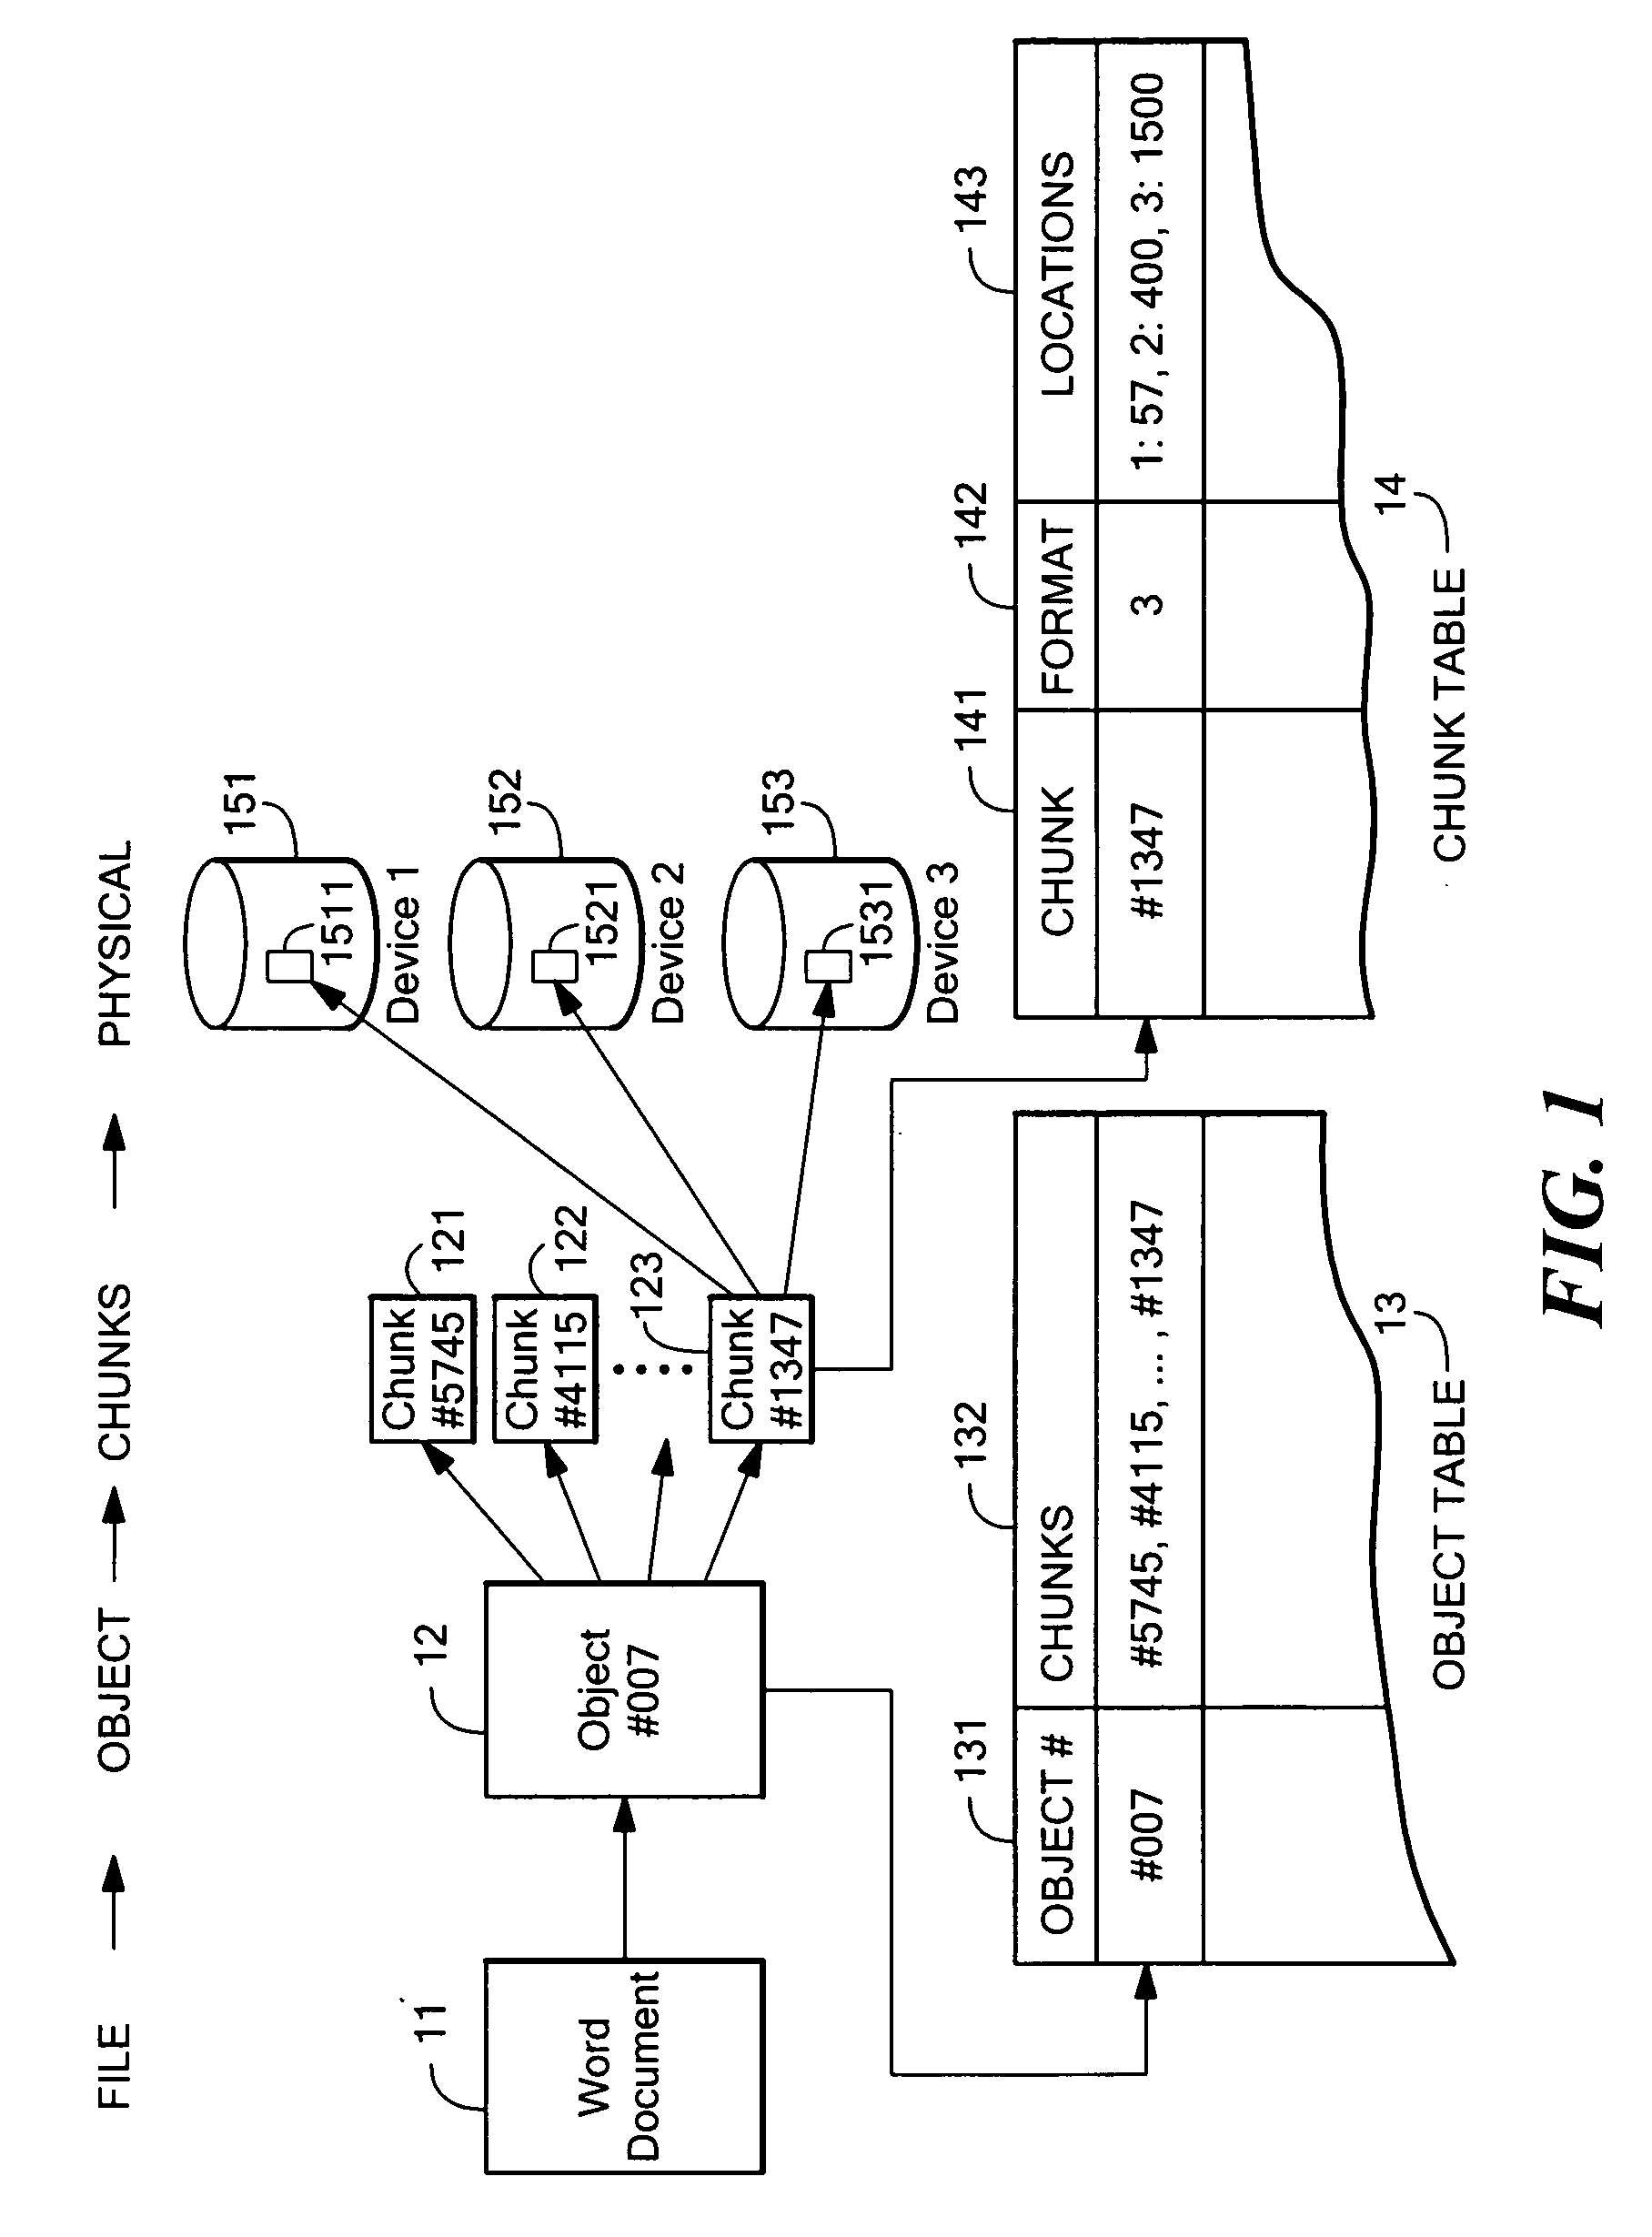 Dynamically expandable and contractible fault-tolerant storage system permitting variously sized storage devices and method